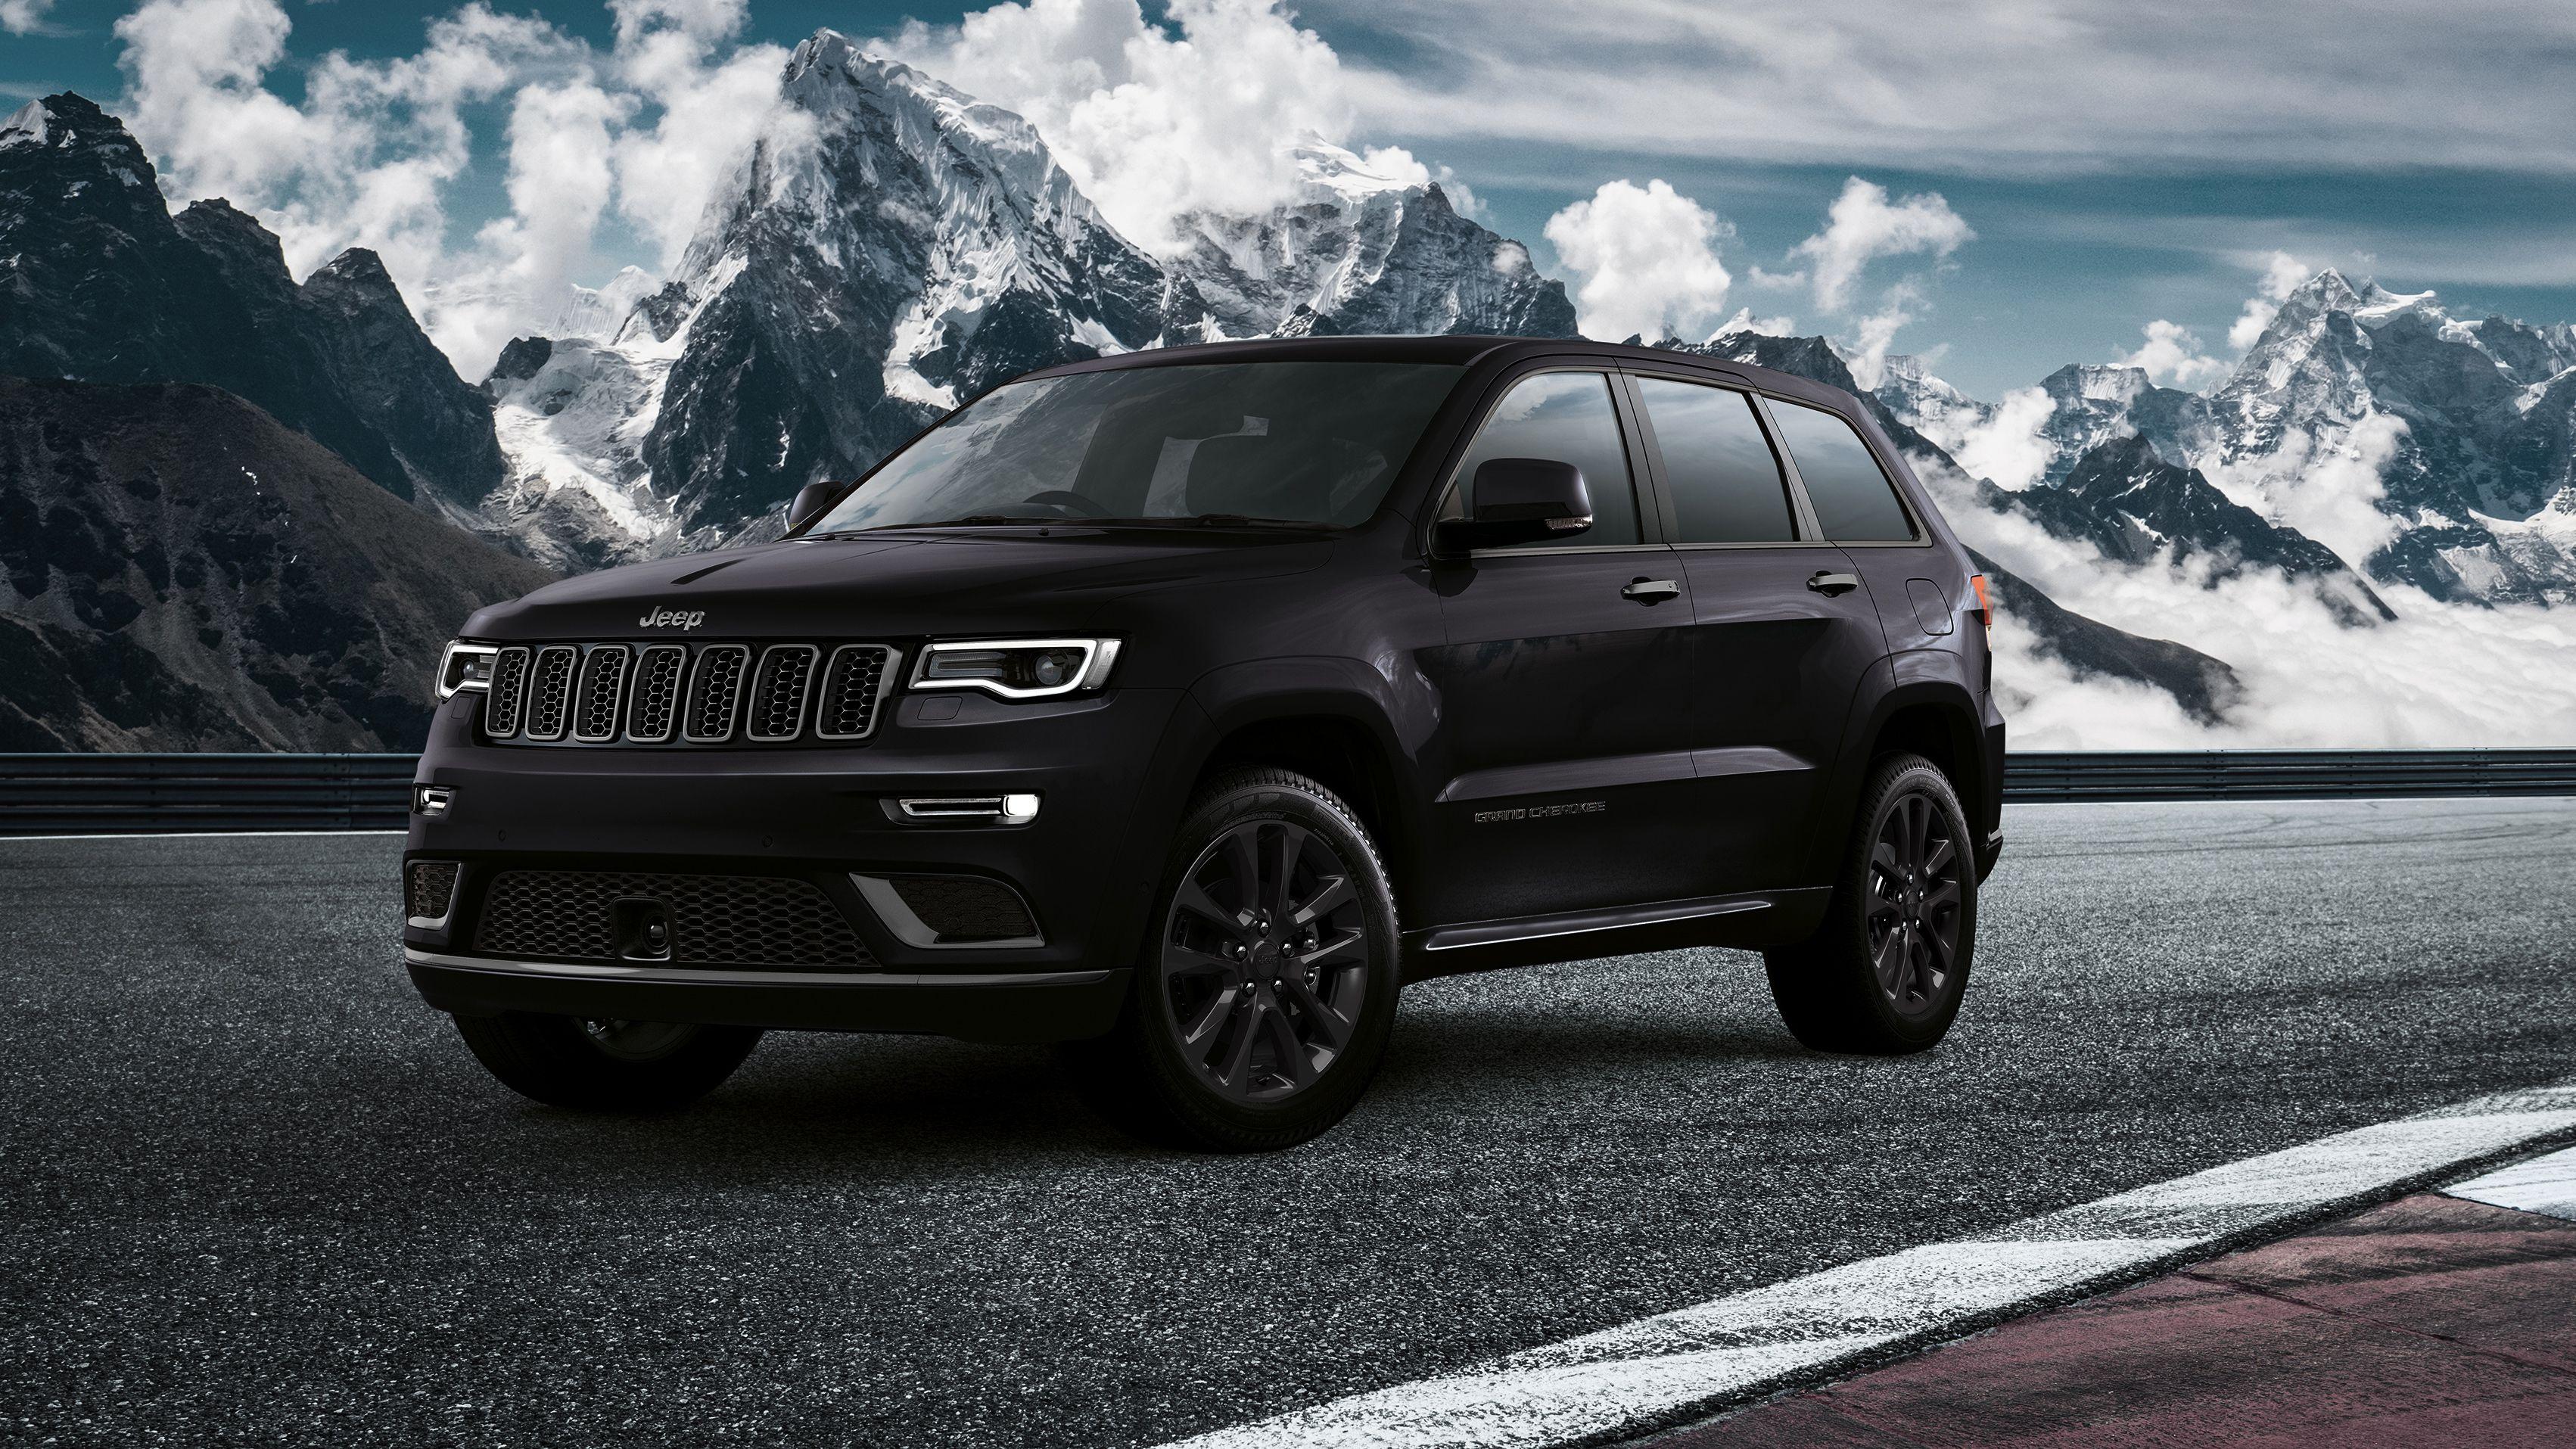 Jeep Grand Cherokee Wallpapers Top Free Jeep Grand Cherokee Backgrounds Wallpaperaccess